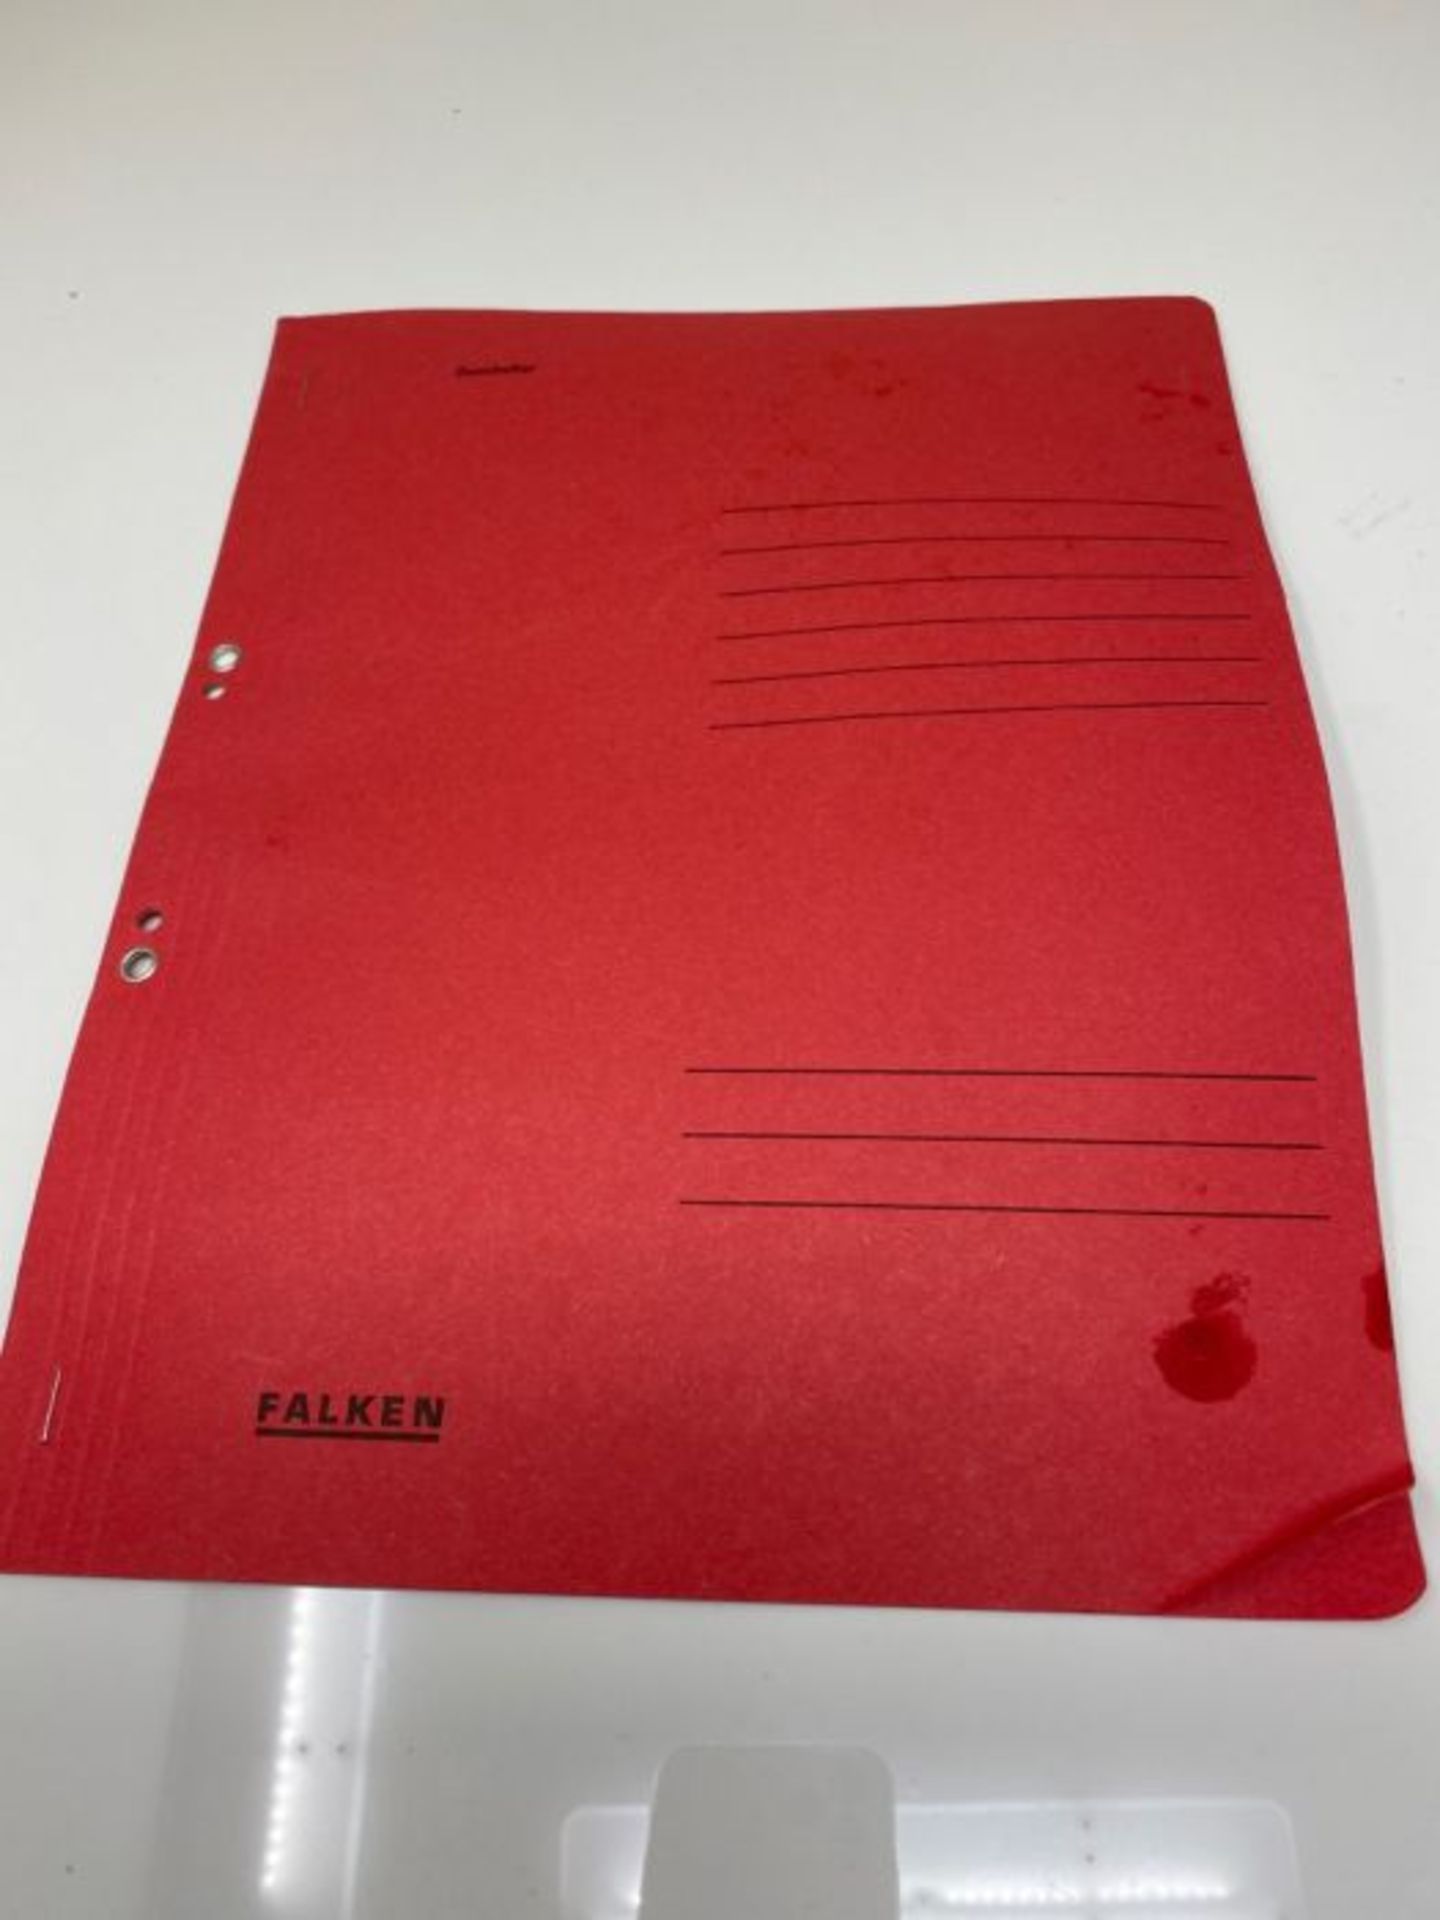 FALKEN Eyelet Flat Files, A4, Full Cover, 250g - Red, Pack 50 - Image 2 of 2